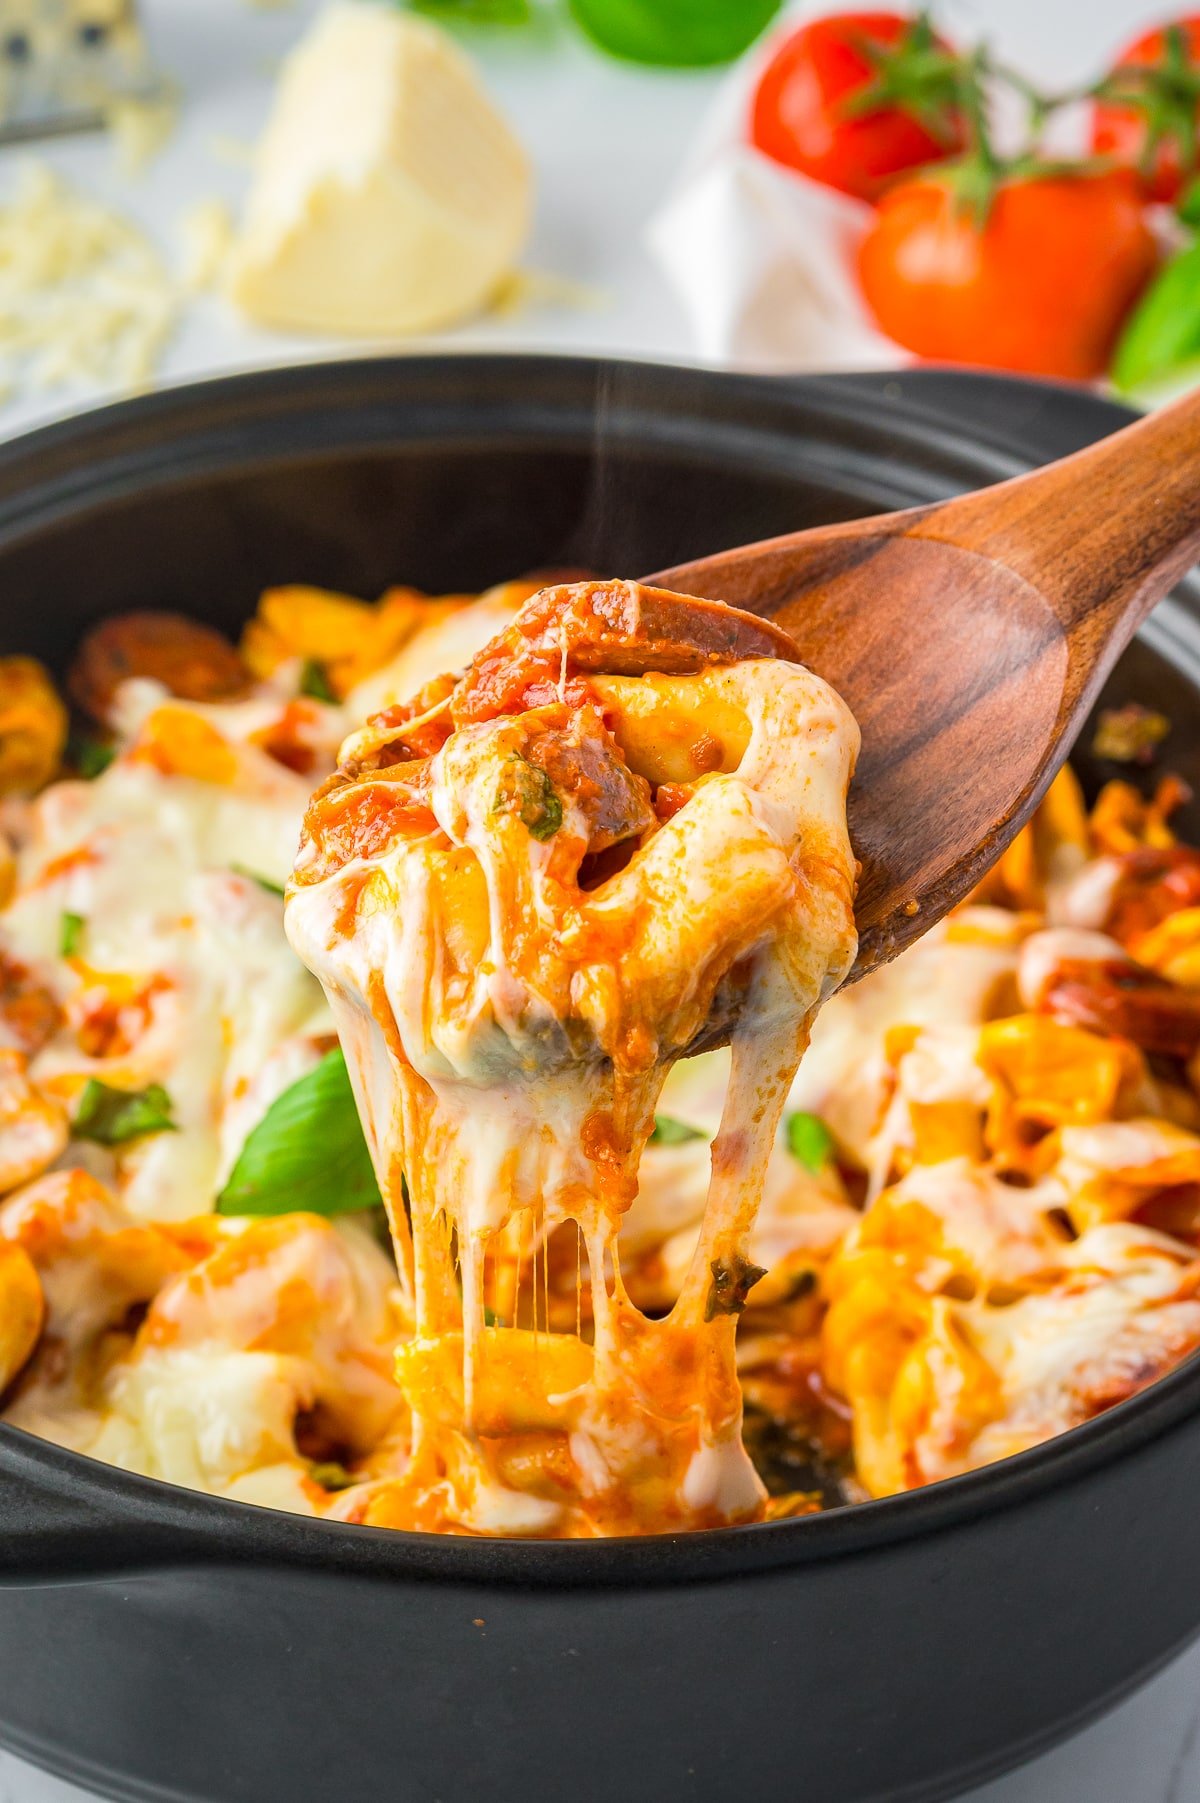 a wooden spoon lifting a bite of Baked Tortellini out of the baking dish